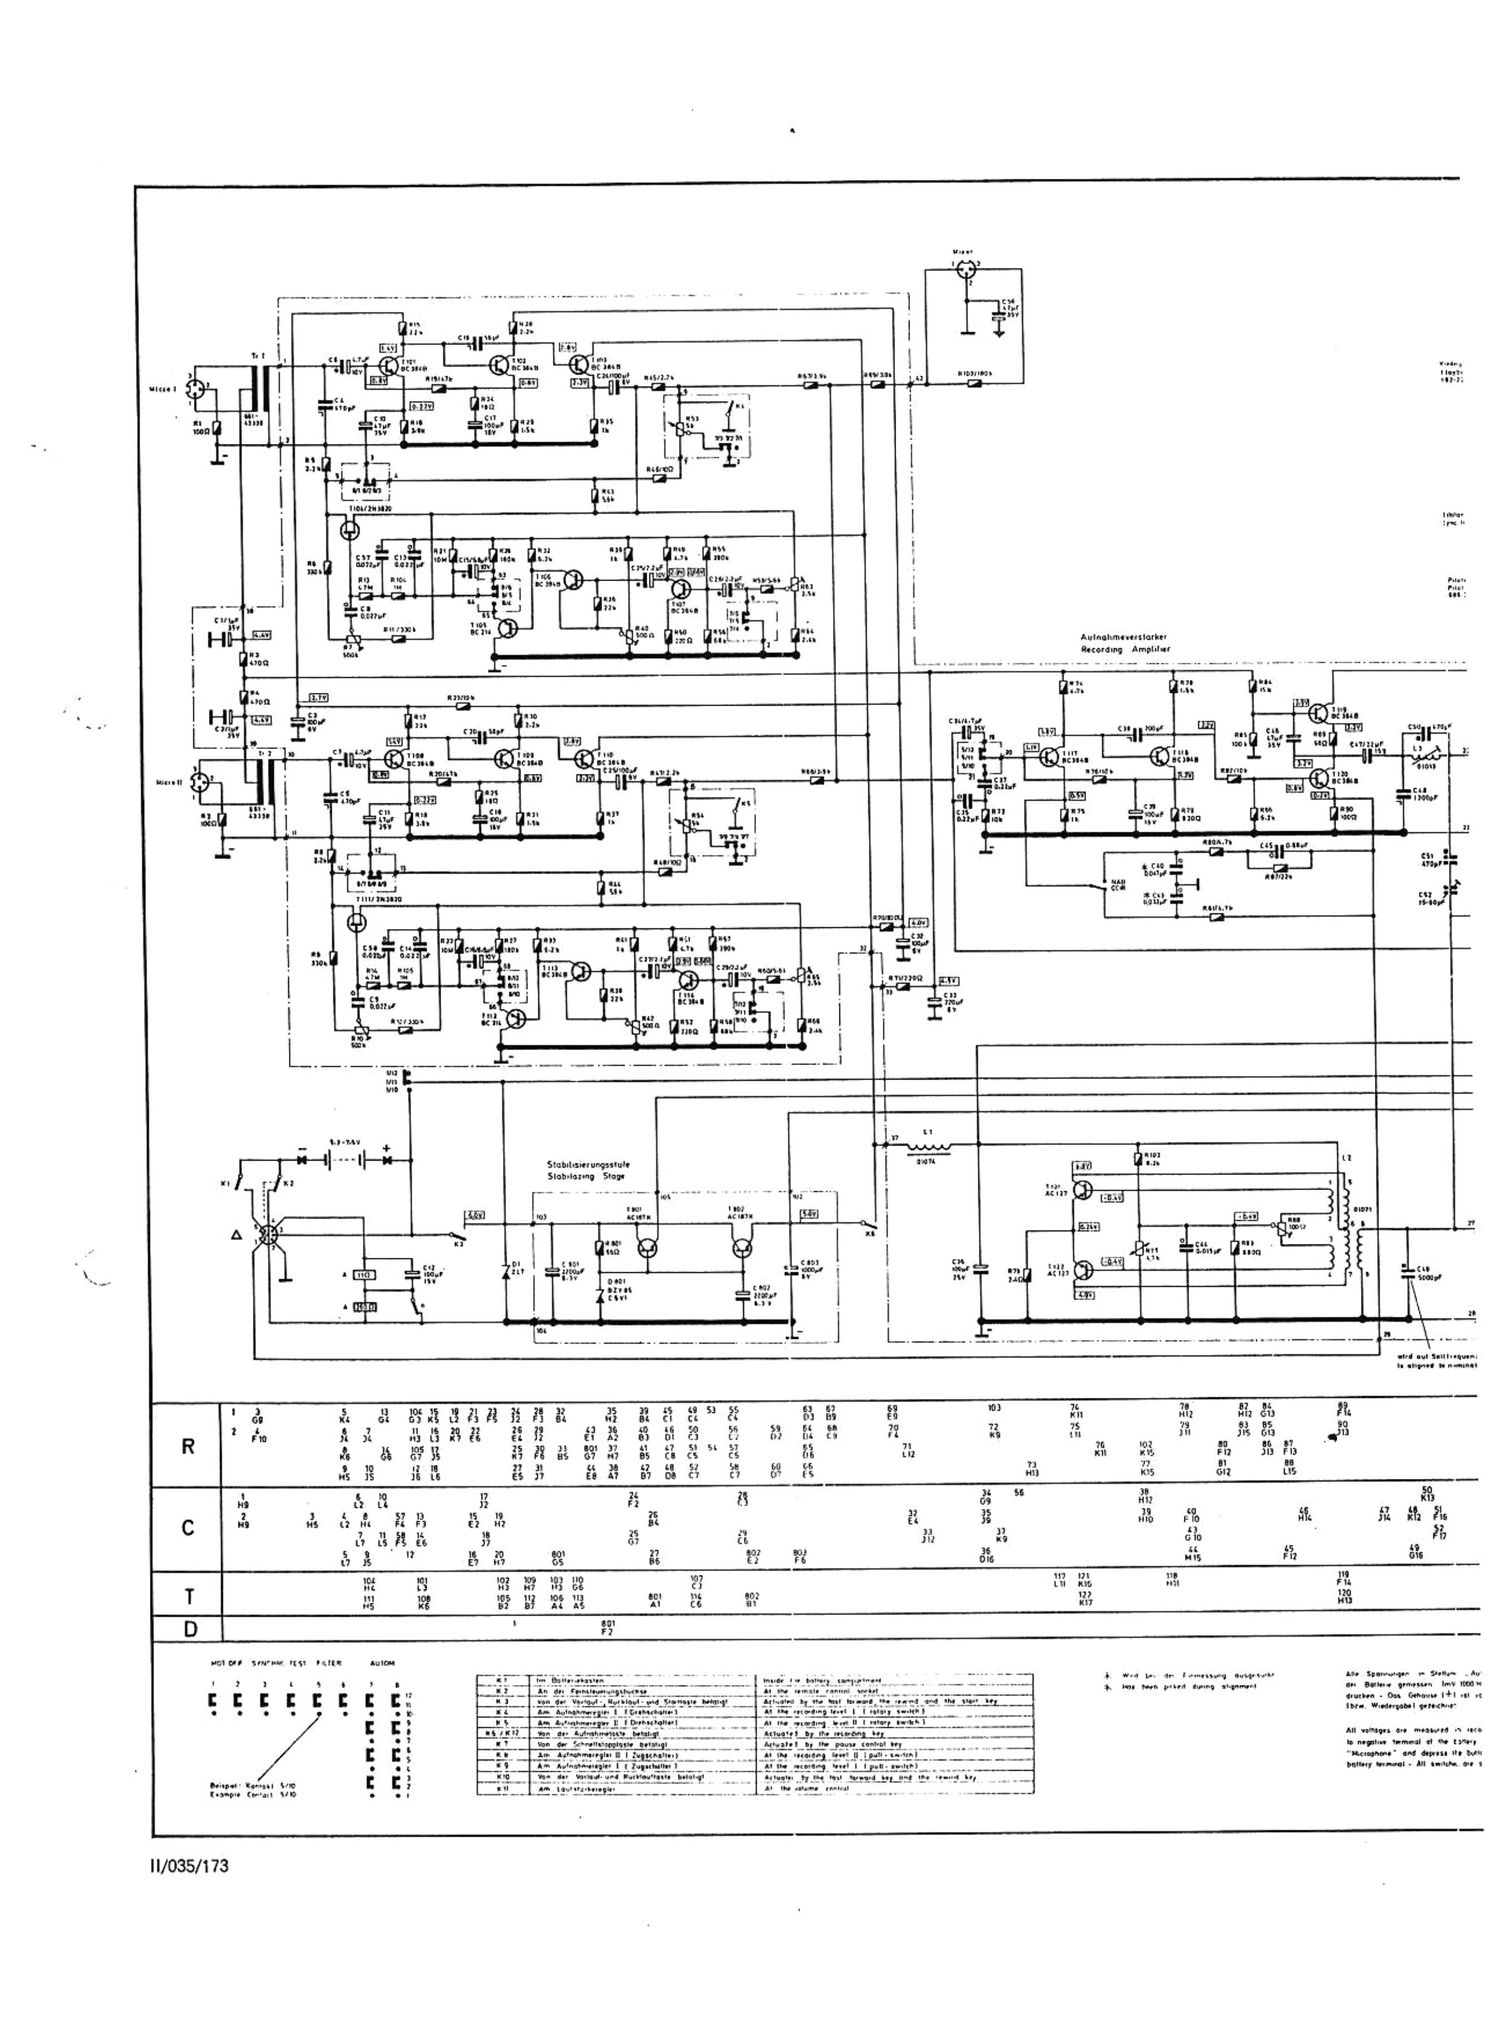 Uher 1200 Report Synchro Schematic